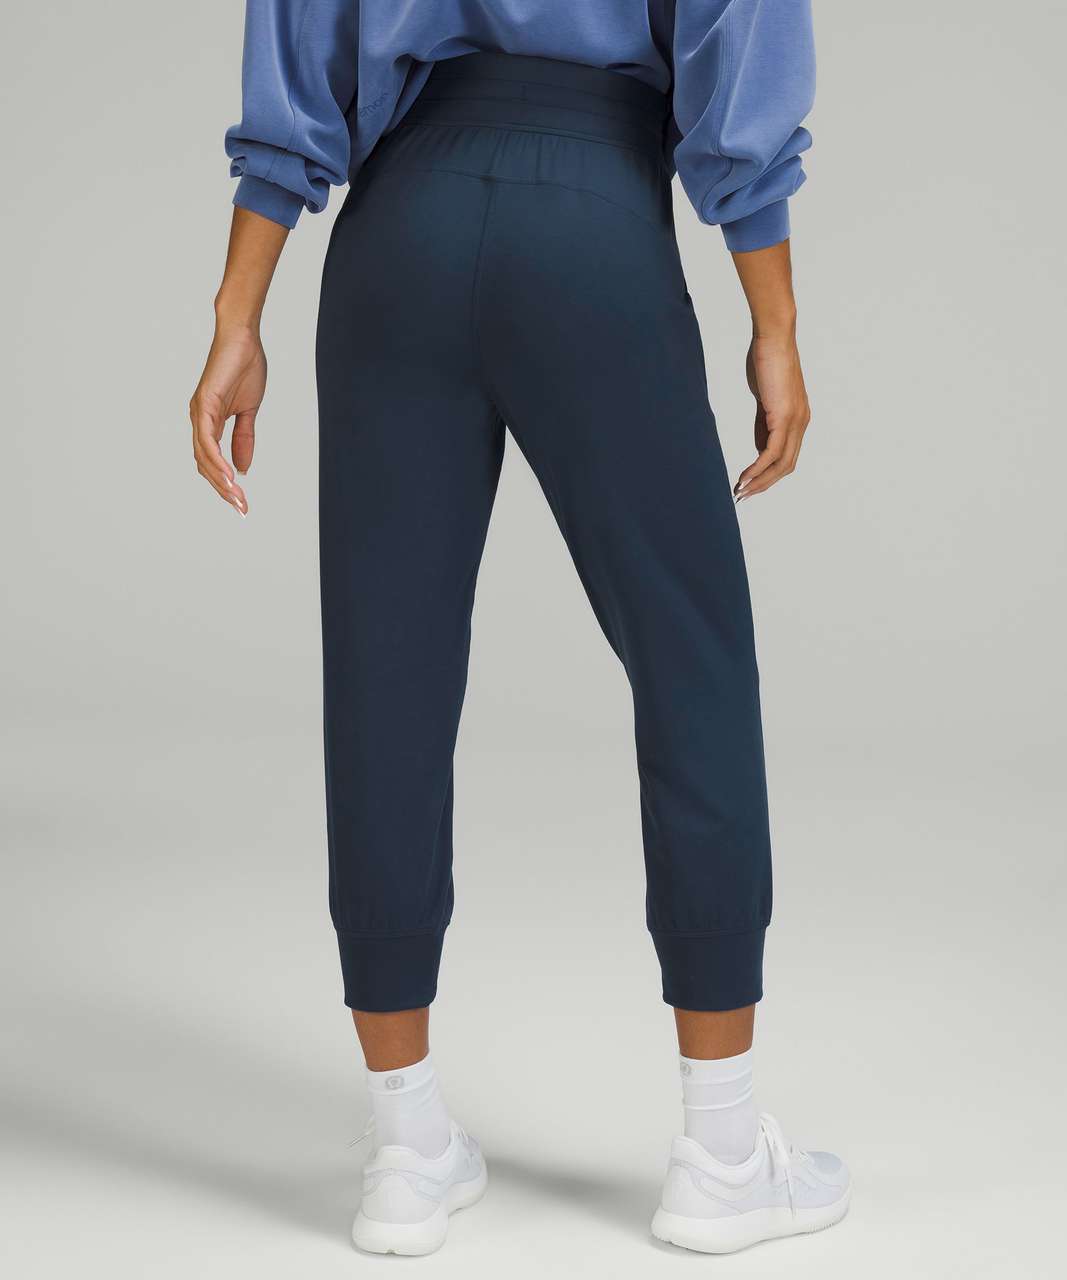 cheap official online shop NWOT Lululemon Ready to Rulu High-Rise Jogger in  Water Drop Blue Women's Size 6